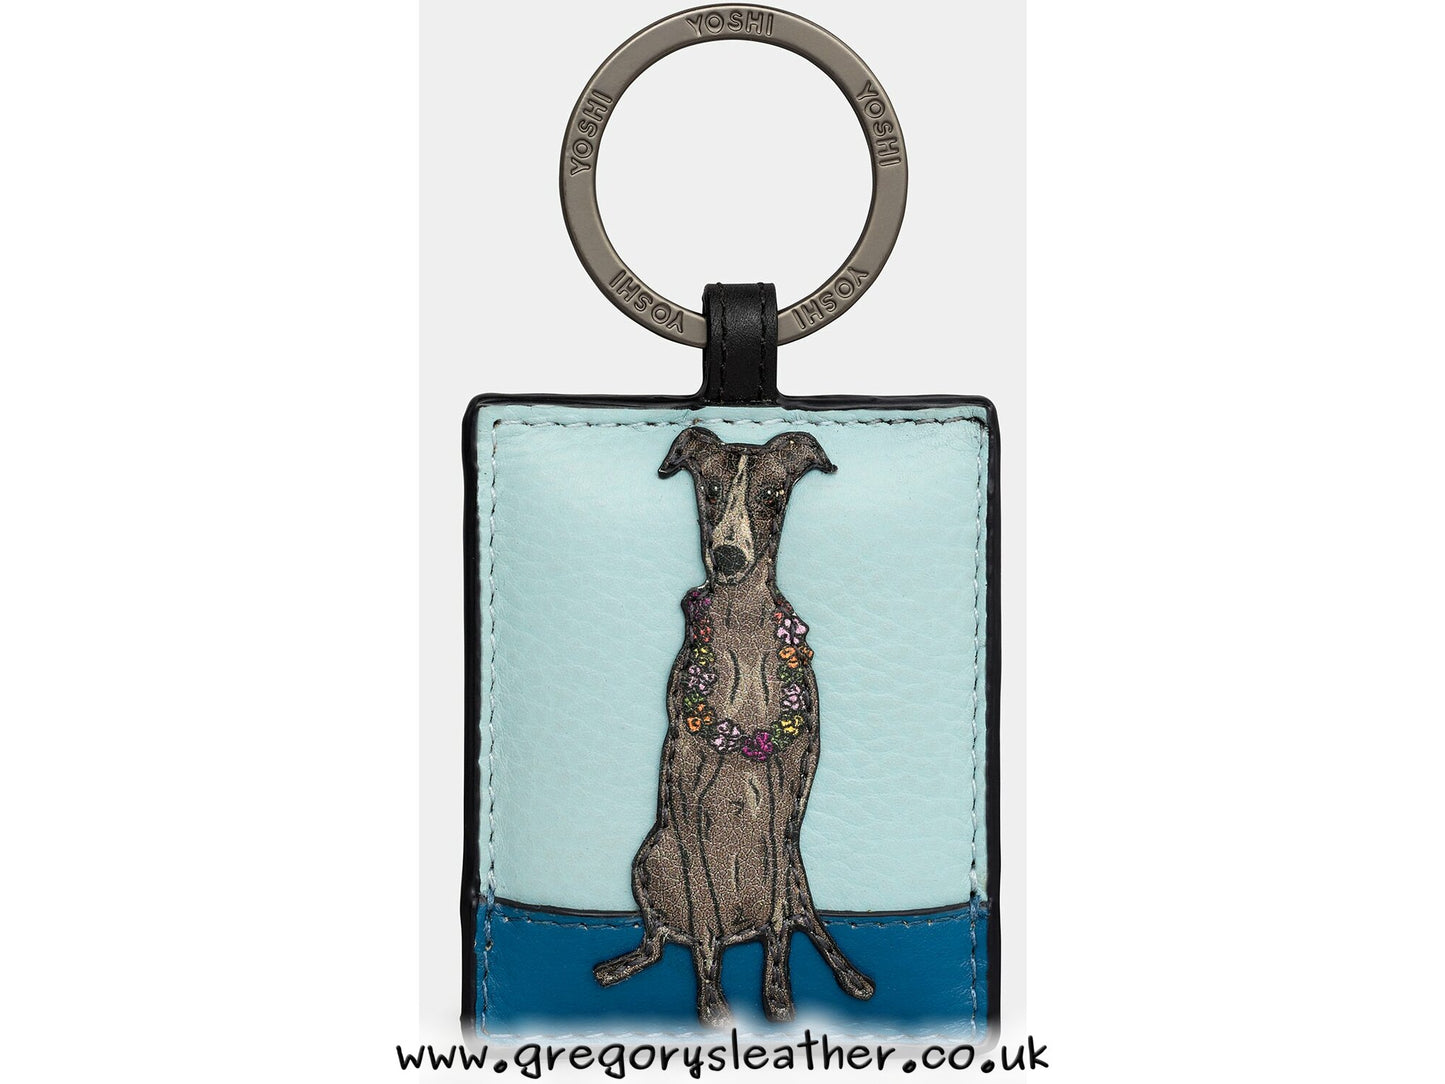 Greyhound Party Dogs - Leather Keyring by Yoshi